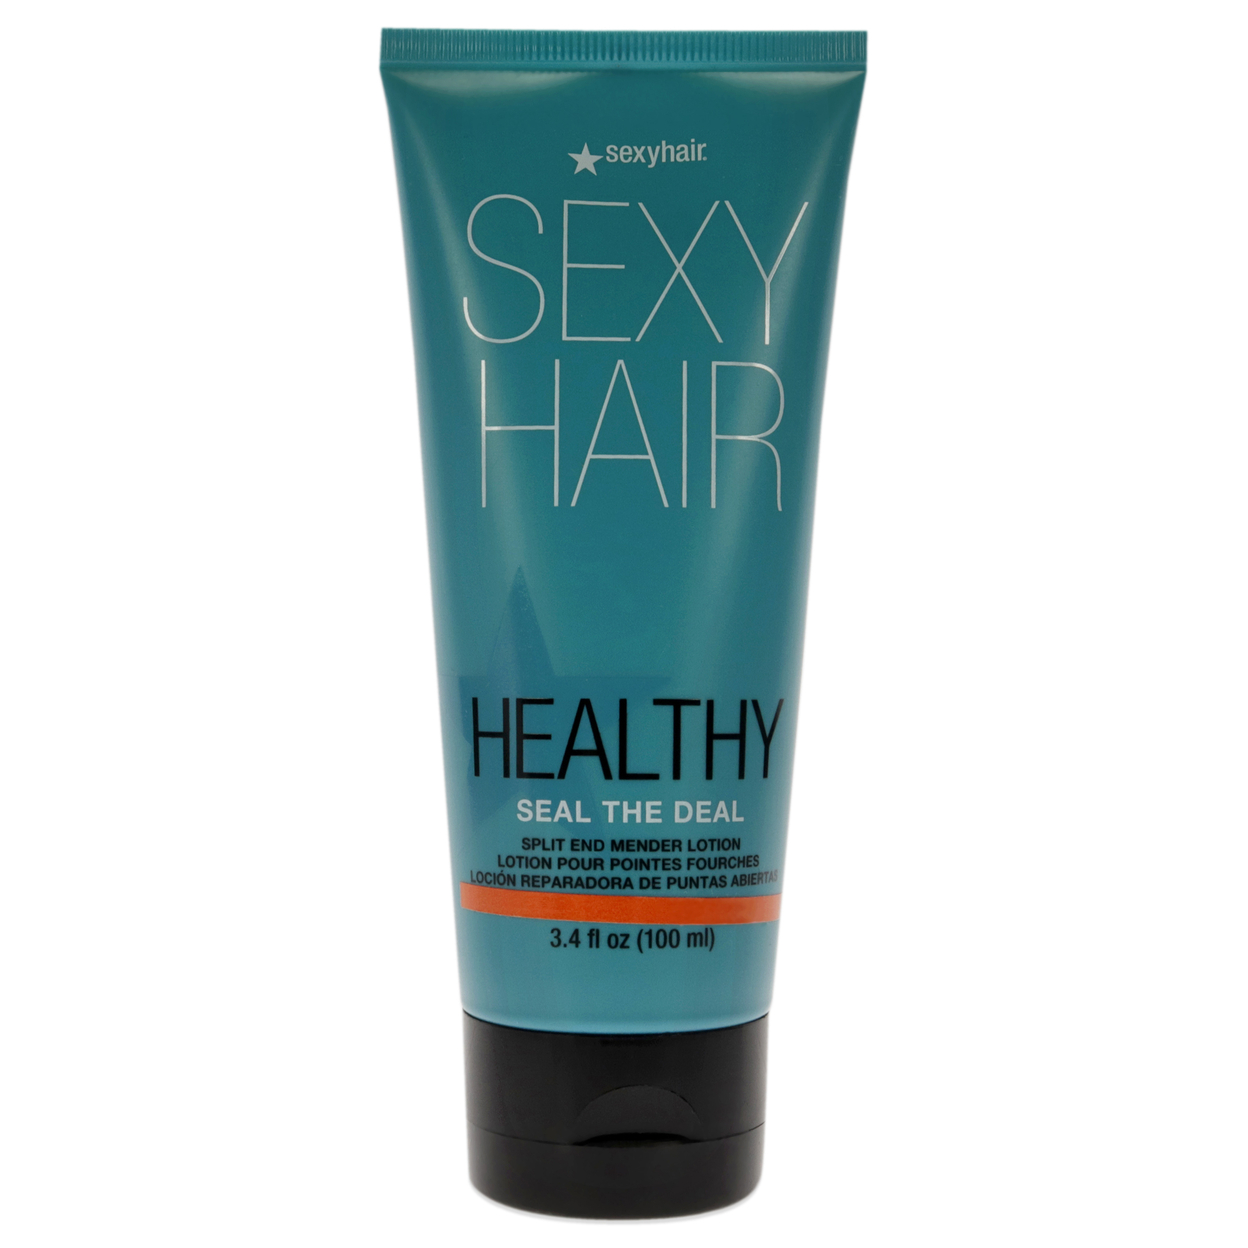 Healthy Sexy Hair Seal The Deal Split And Mender Lotion 3.4 Oz 3.4 Oz